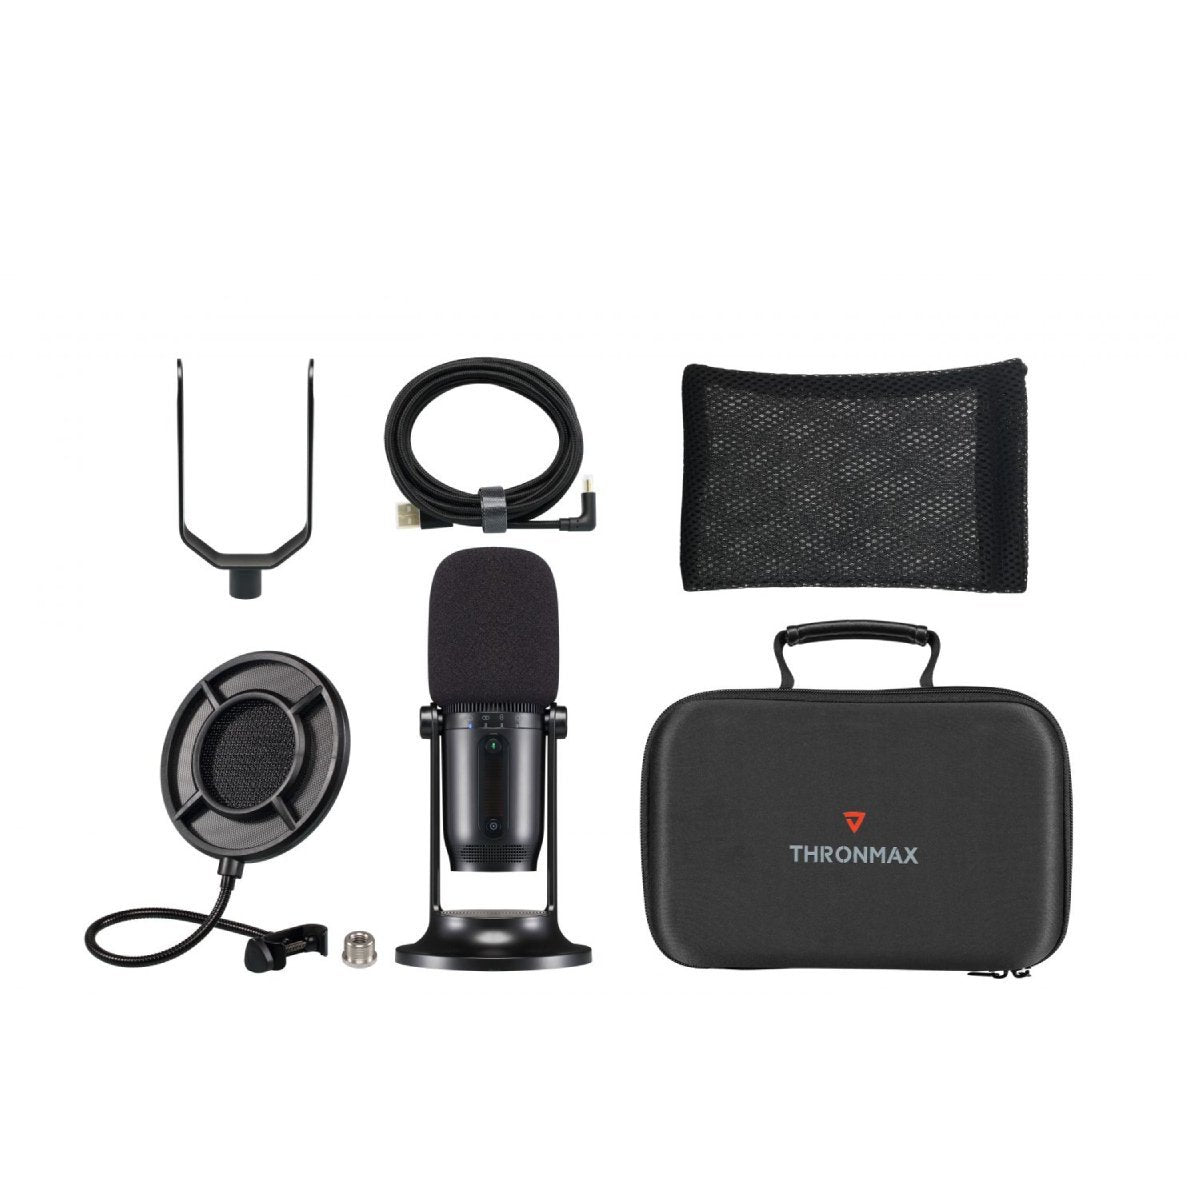 Thronmax Mdrill One M2 USB Condenser Microphone Kit - Store 974 | ستور ٩٧٤